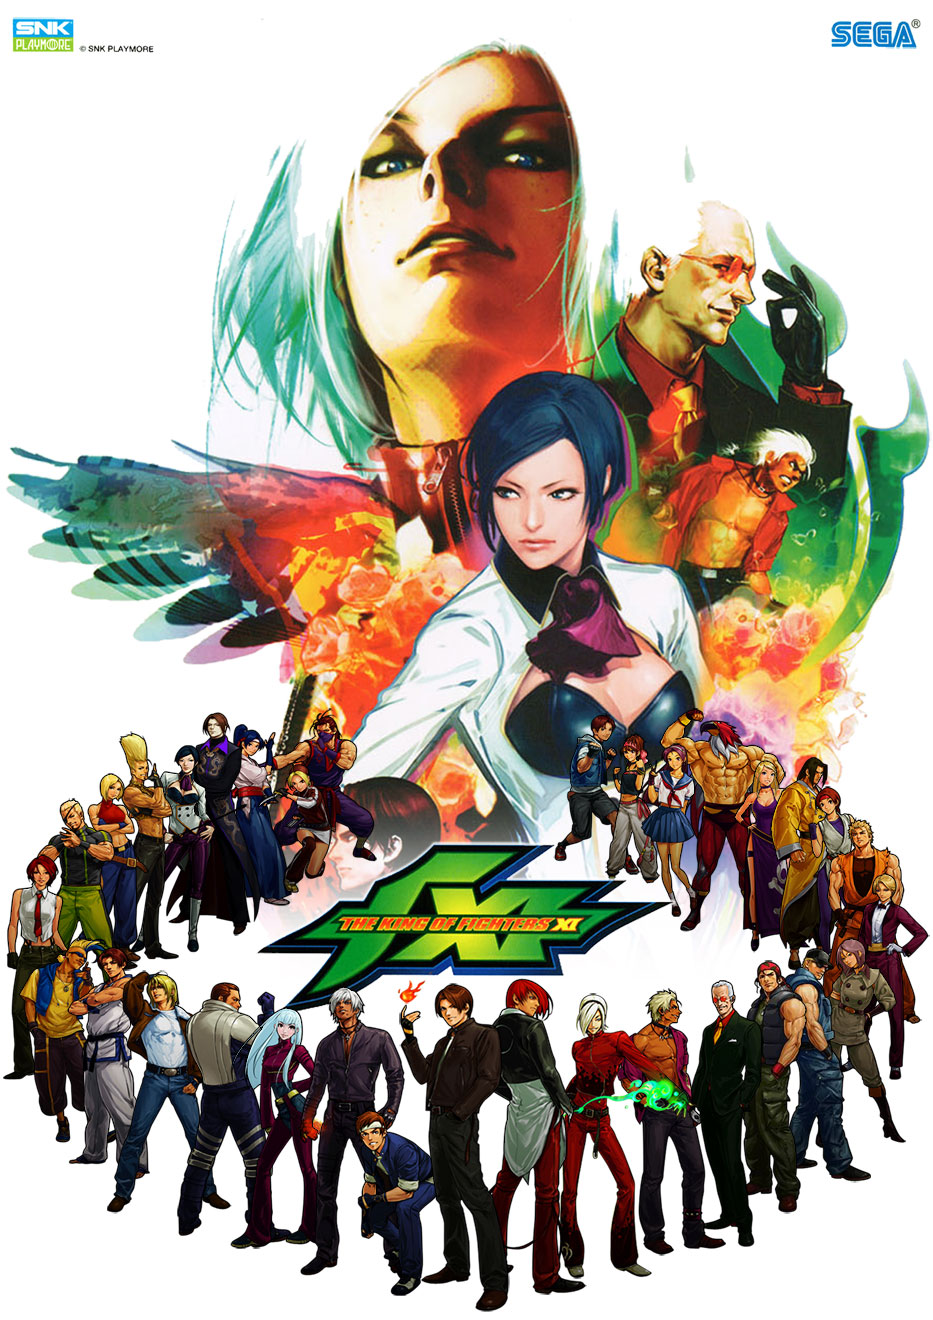 THE KING OF FIGHTERS XI - ゲームカタログ@Wiki ～名作からクソゲー 